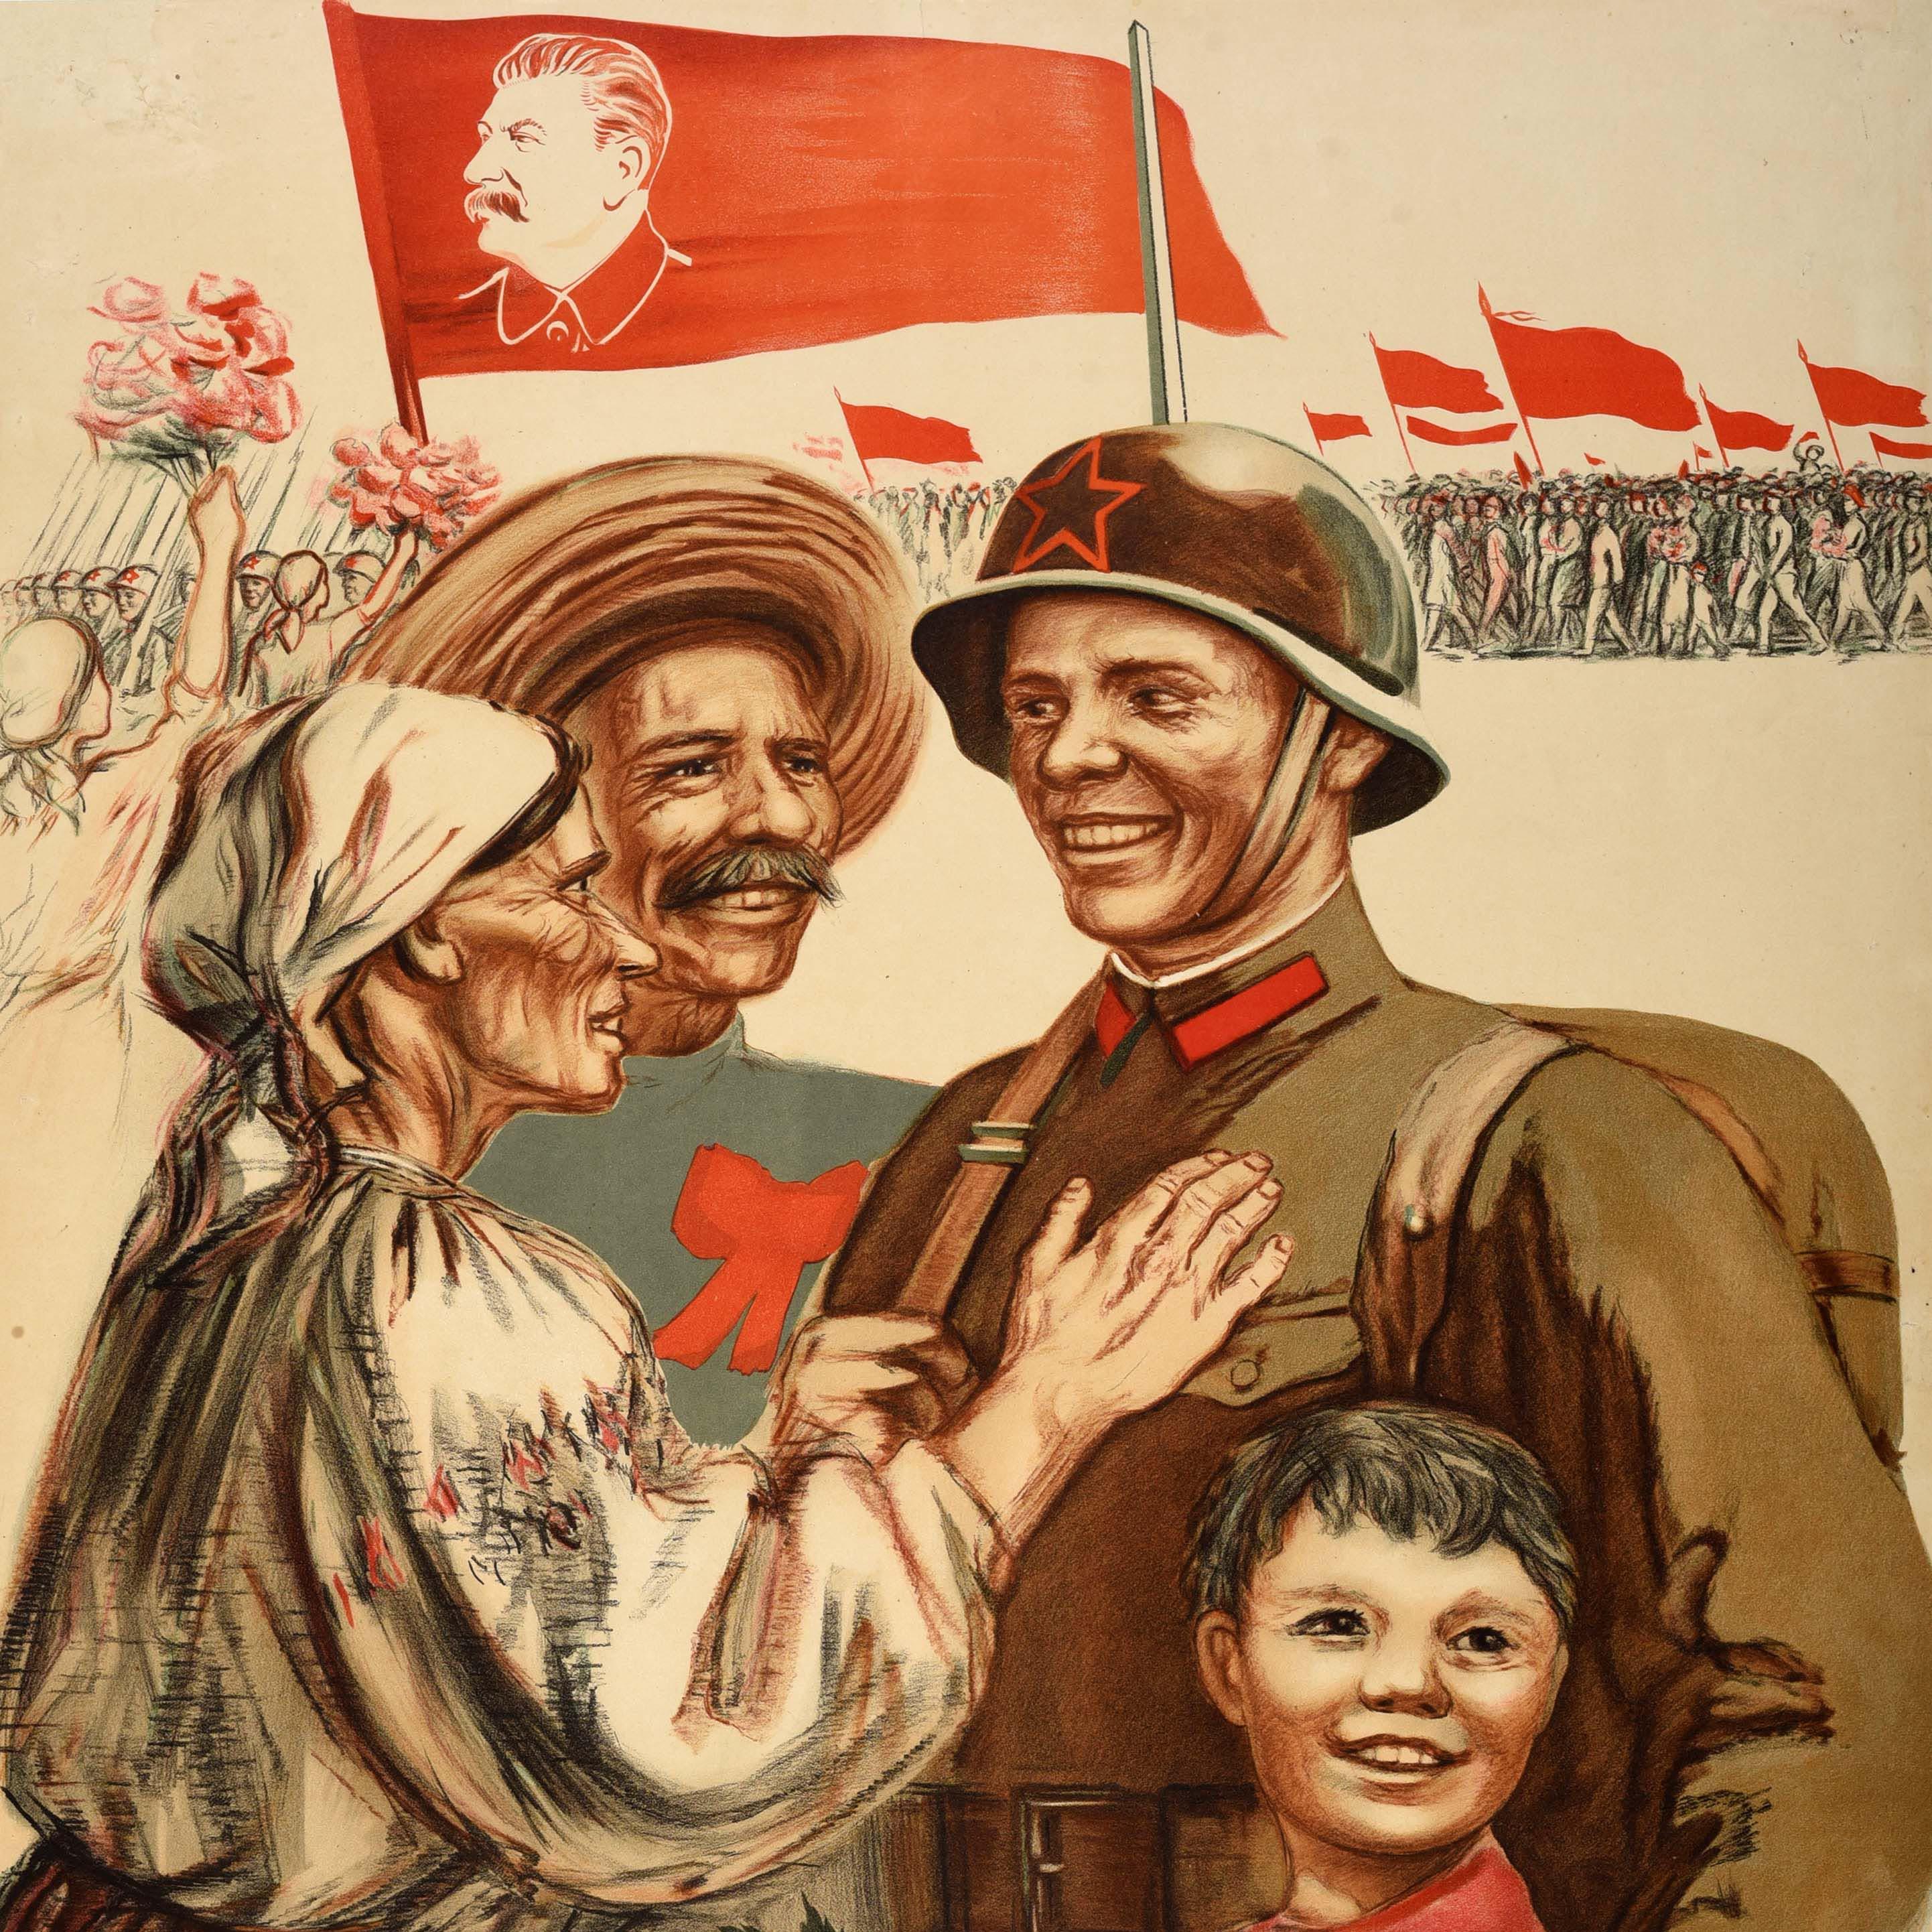 Original vintage Soviet propaganda poster - Long live the Red Army the flesh and blood of the Soviet people! / Да здравствует красная армия-плоть от плоти советского народа! Artwork featuring a smiling young soldier in military uniform with a red